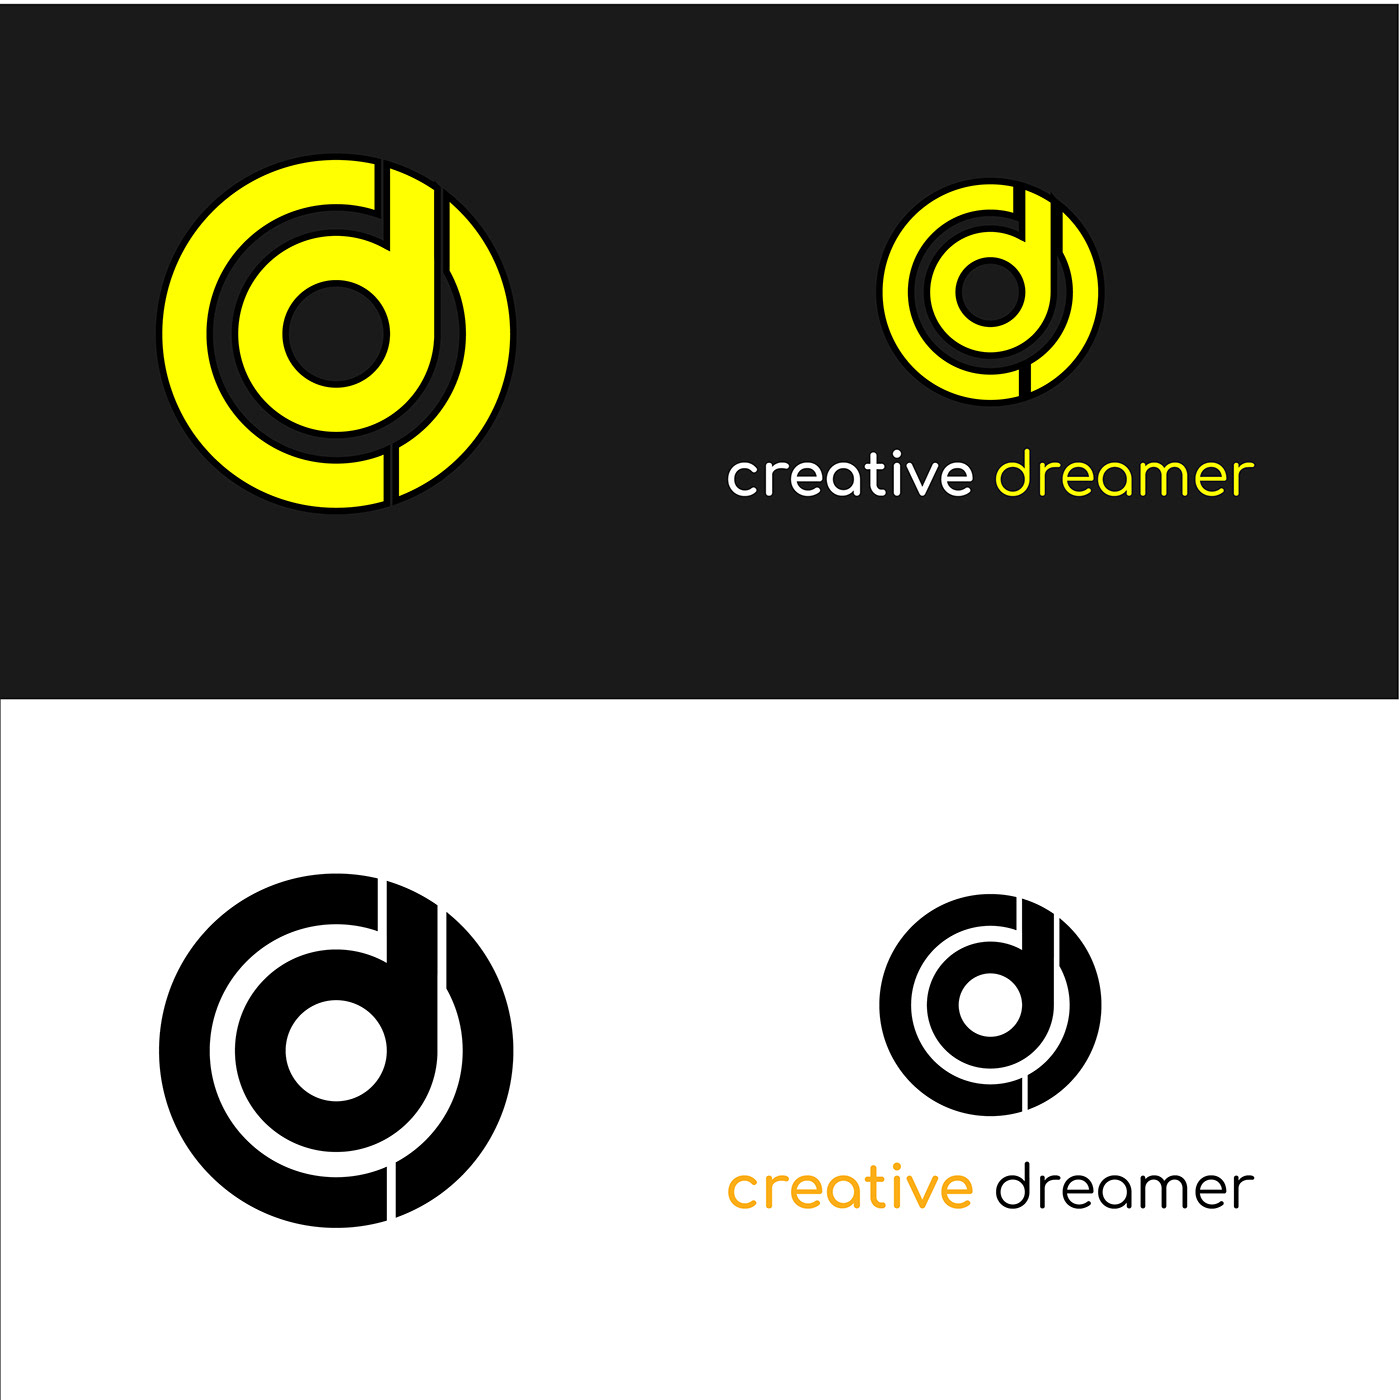 projects Logo project new logo design design inspiration